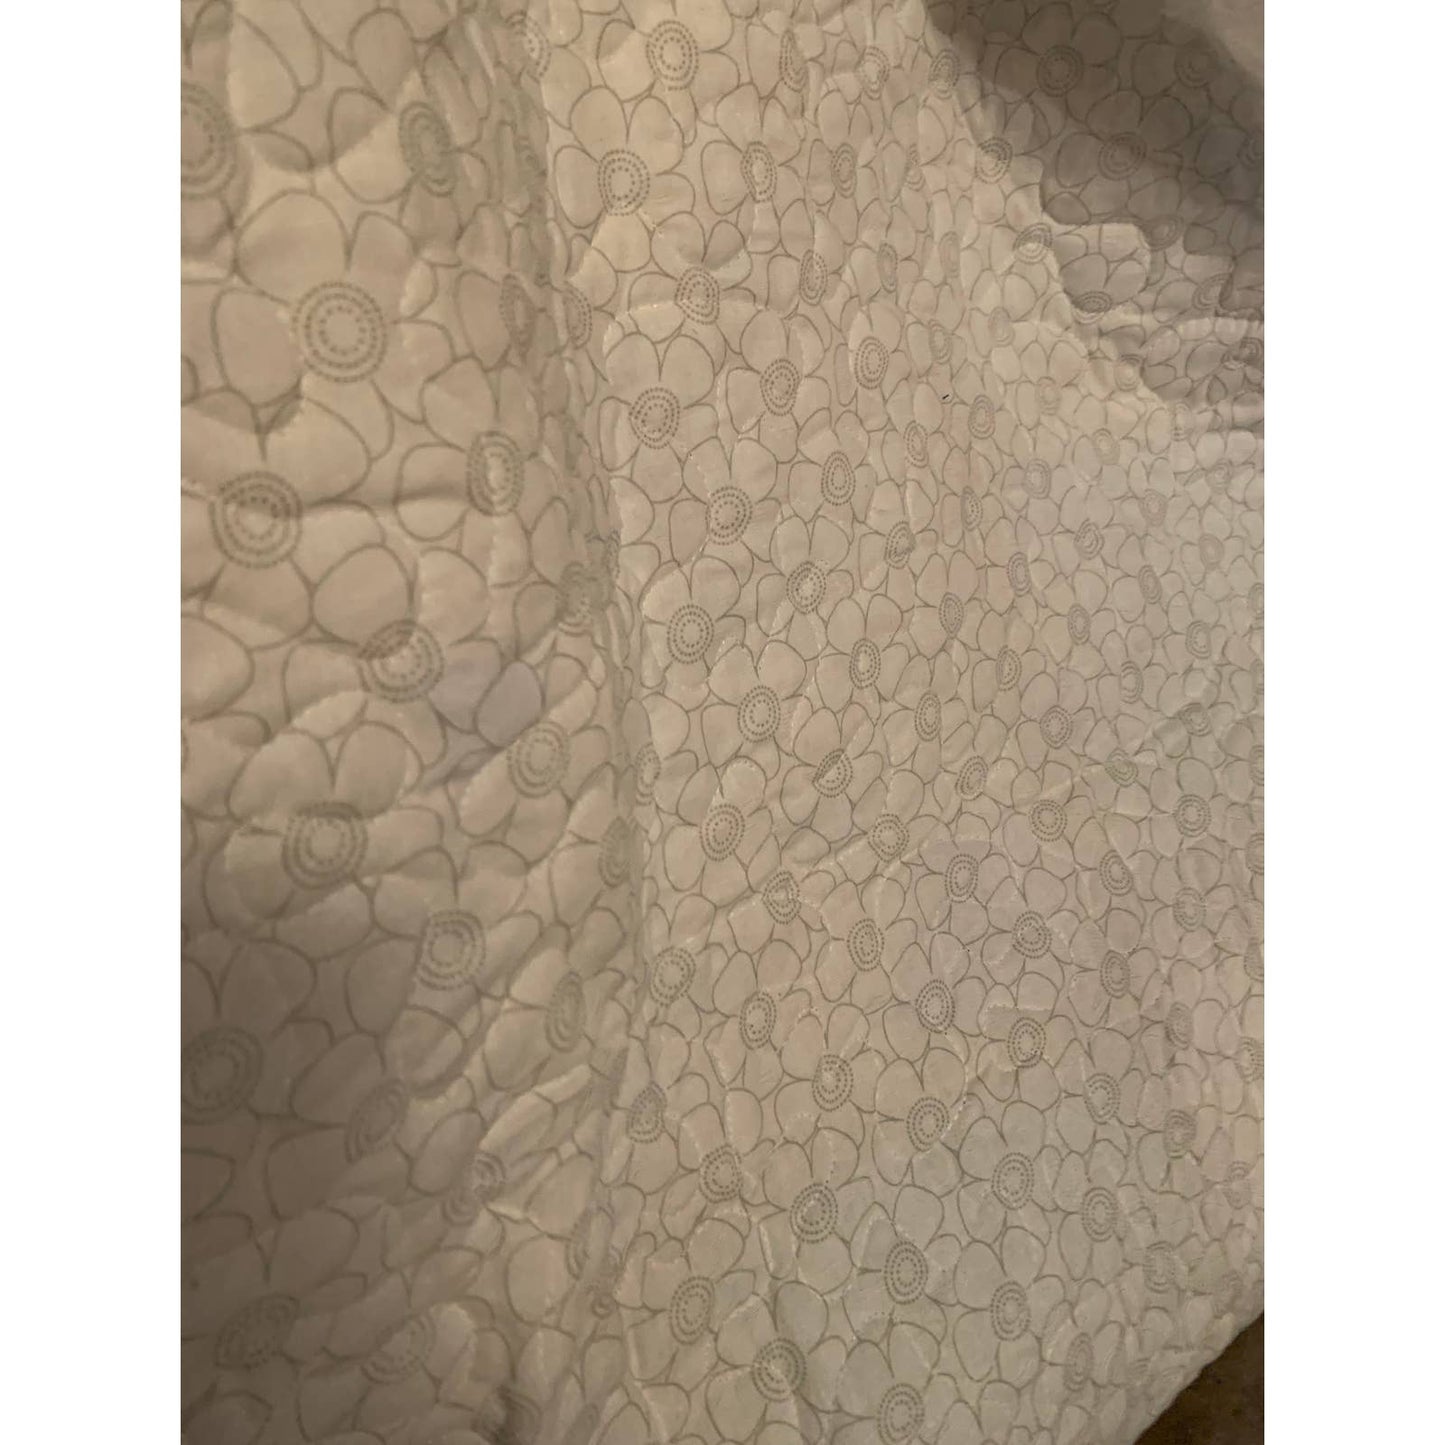 Hydrangeas and Lavender Twin Quilt